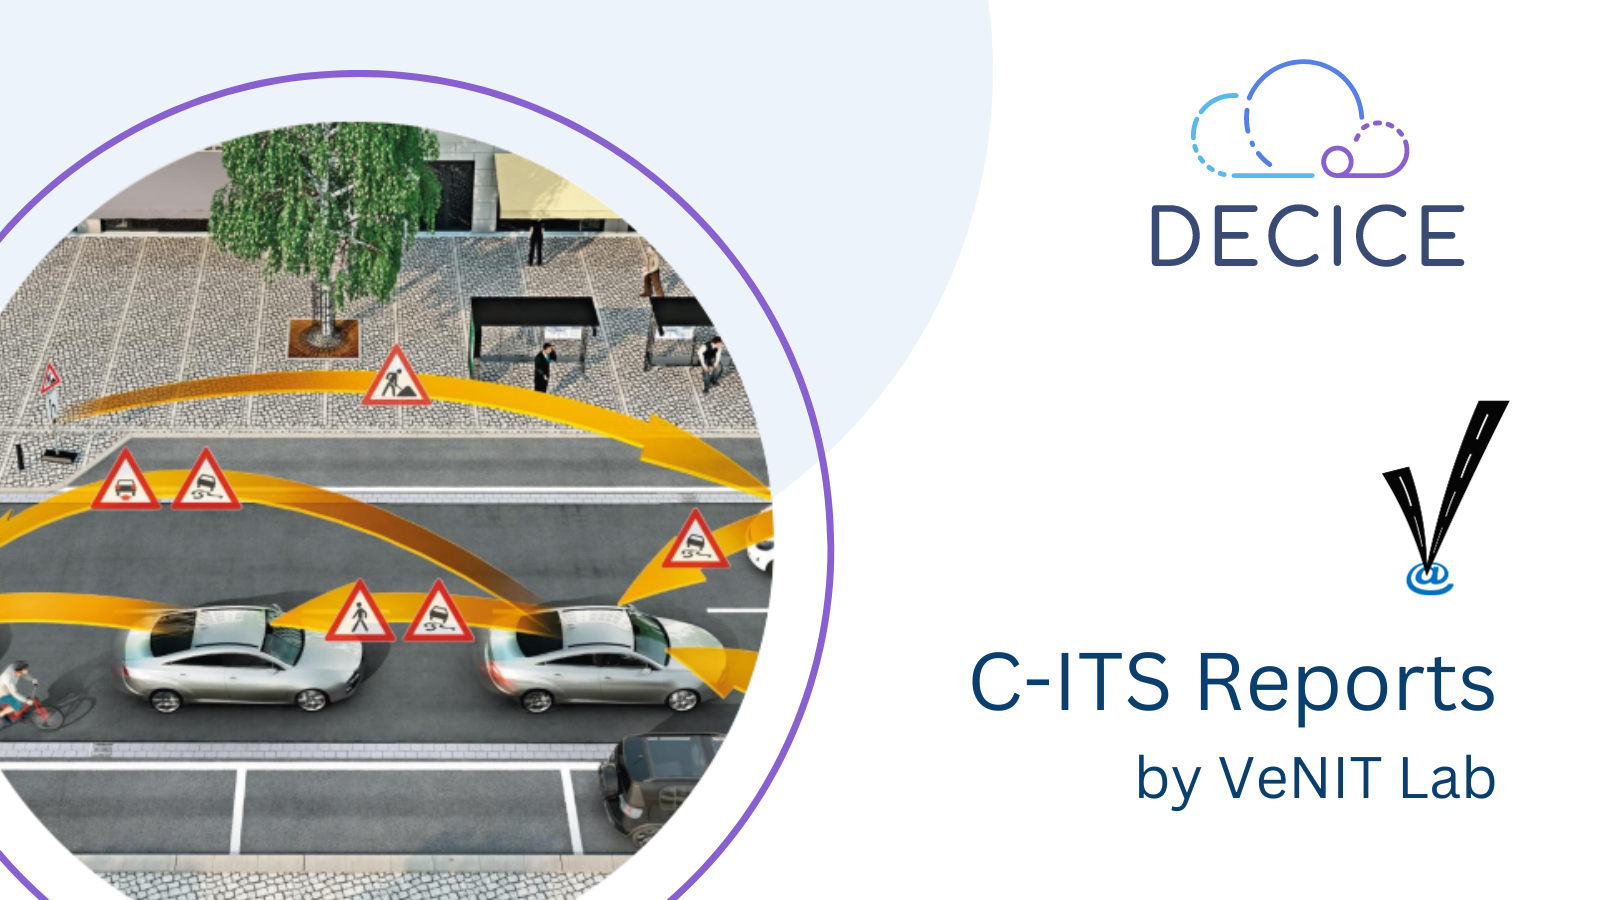 C-ITS Report by Marmara University, Image showing cars communicating and showing risks, VeNIT Lab and DECICE Logo